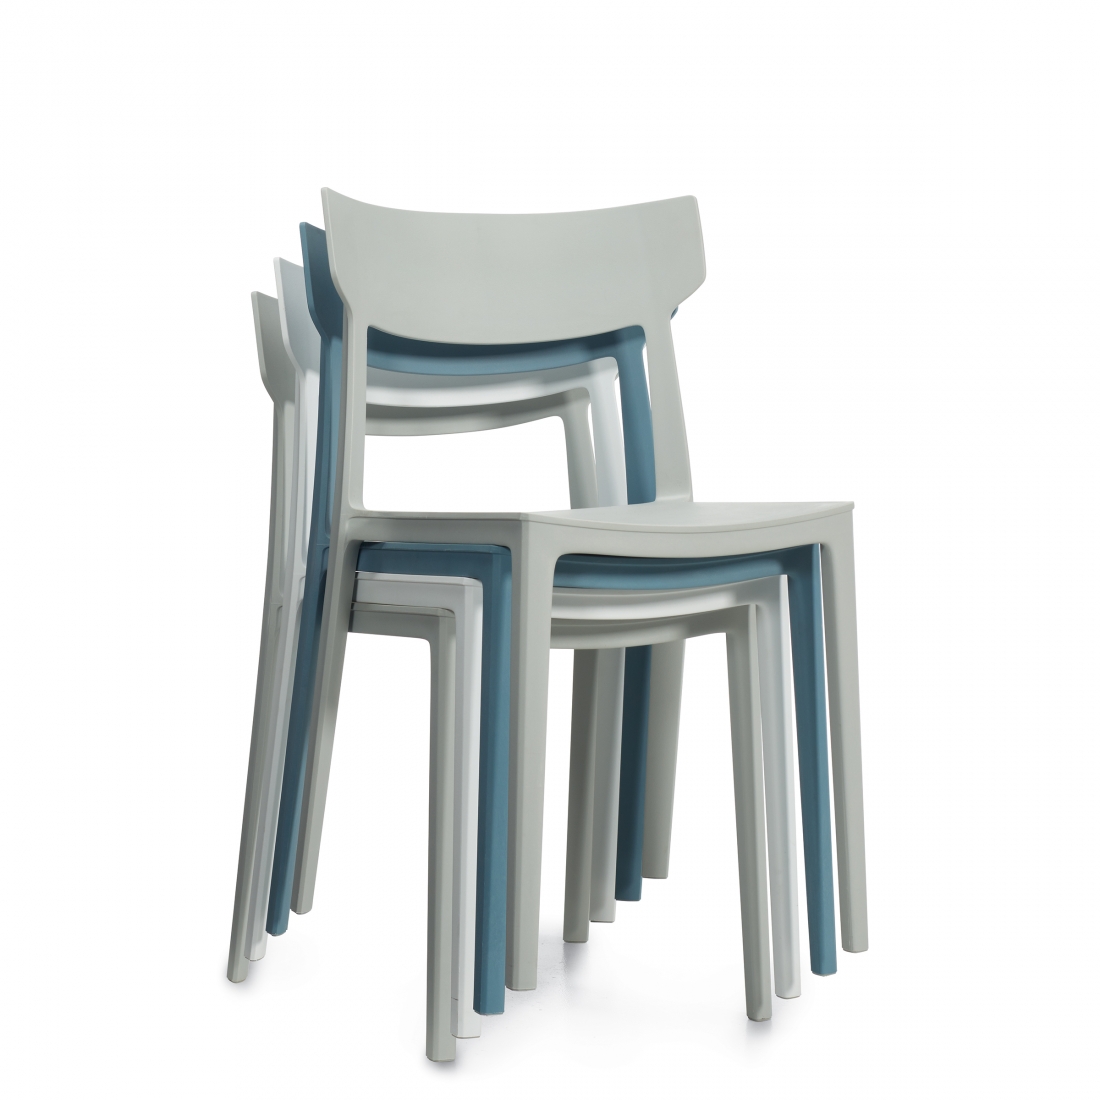 Kylie | Multi-Purpose Stacking Chair - Cadet